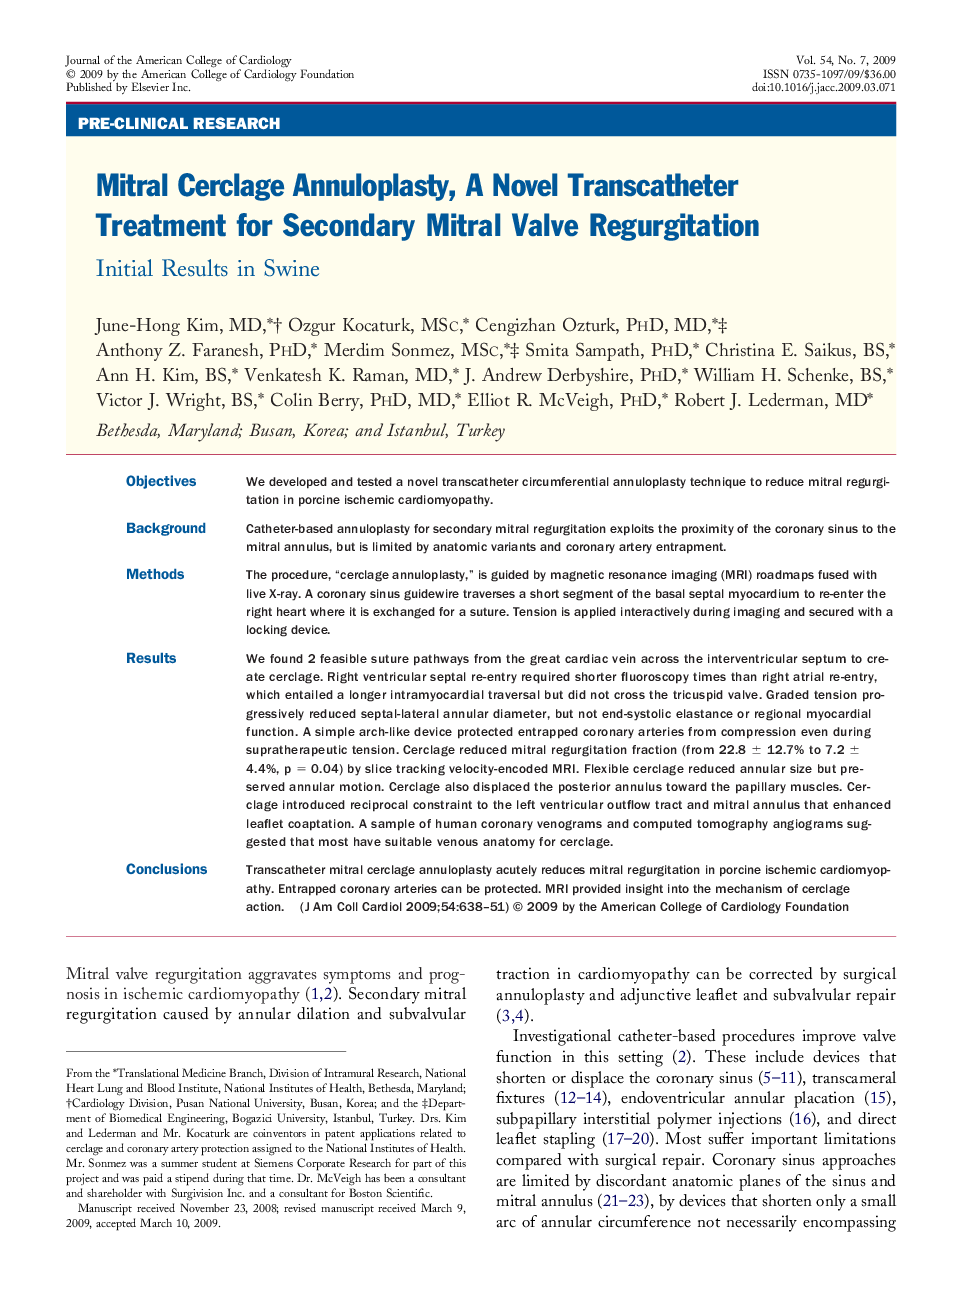 Mitral Cerclage Annuloplasty, A Novel Transcatheter Treatment for Secondary Mitral Valve Regurgitation : Initial Results in Swine